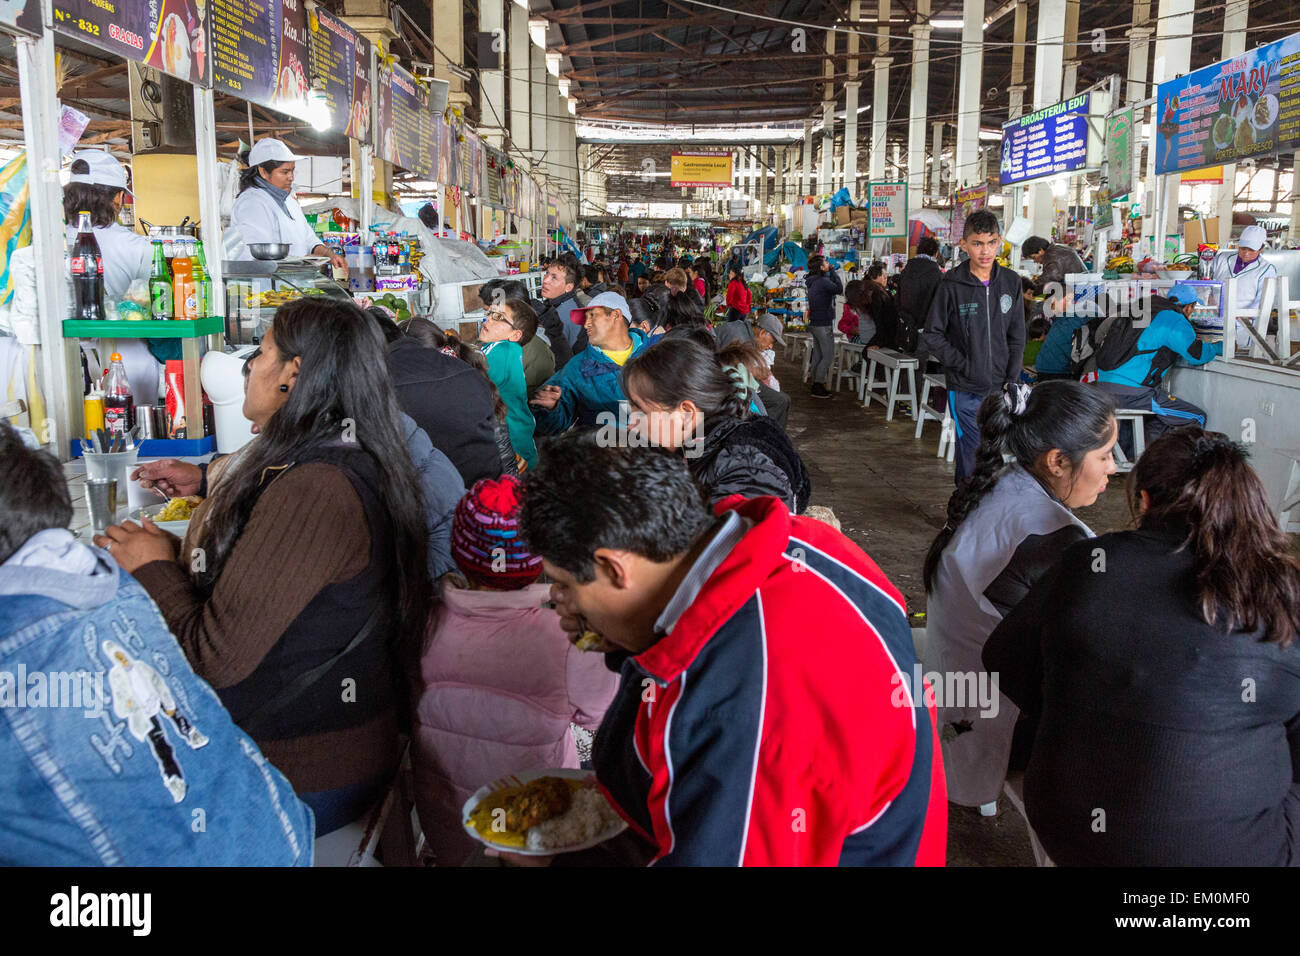 Peru, Cusco, San Pedro Market.  People Eating in the Food Court Area of the Market. Stock Photo